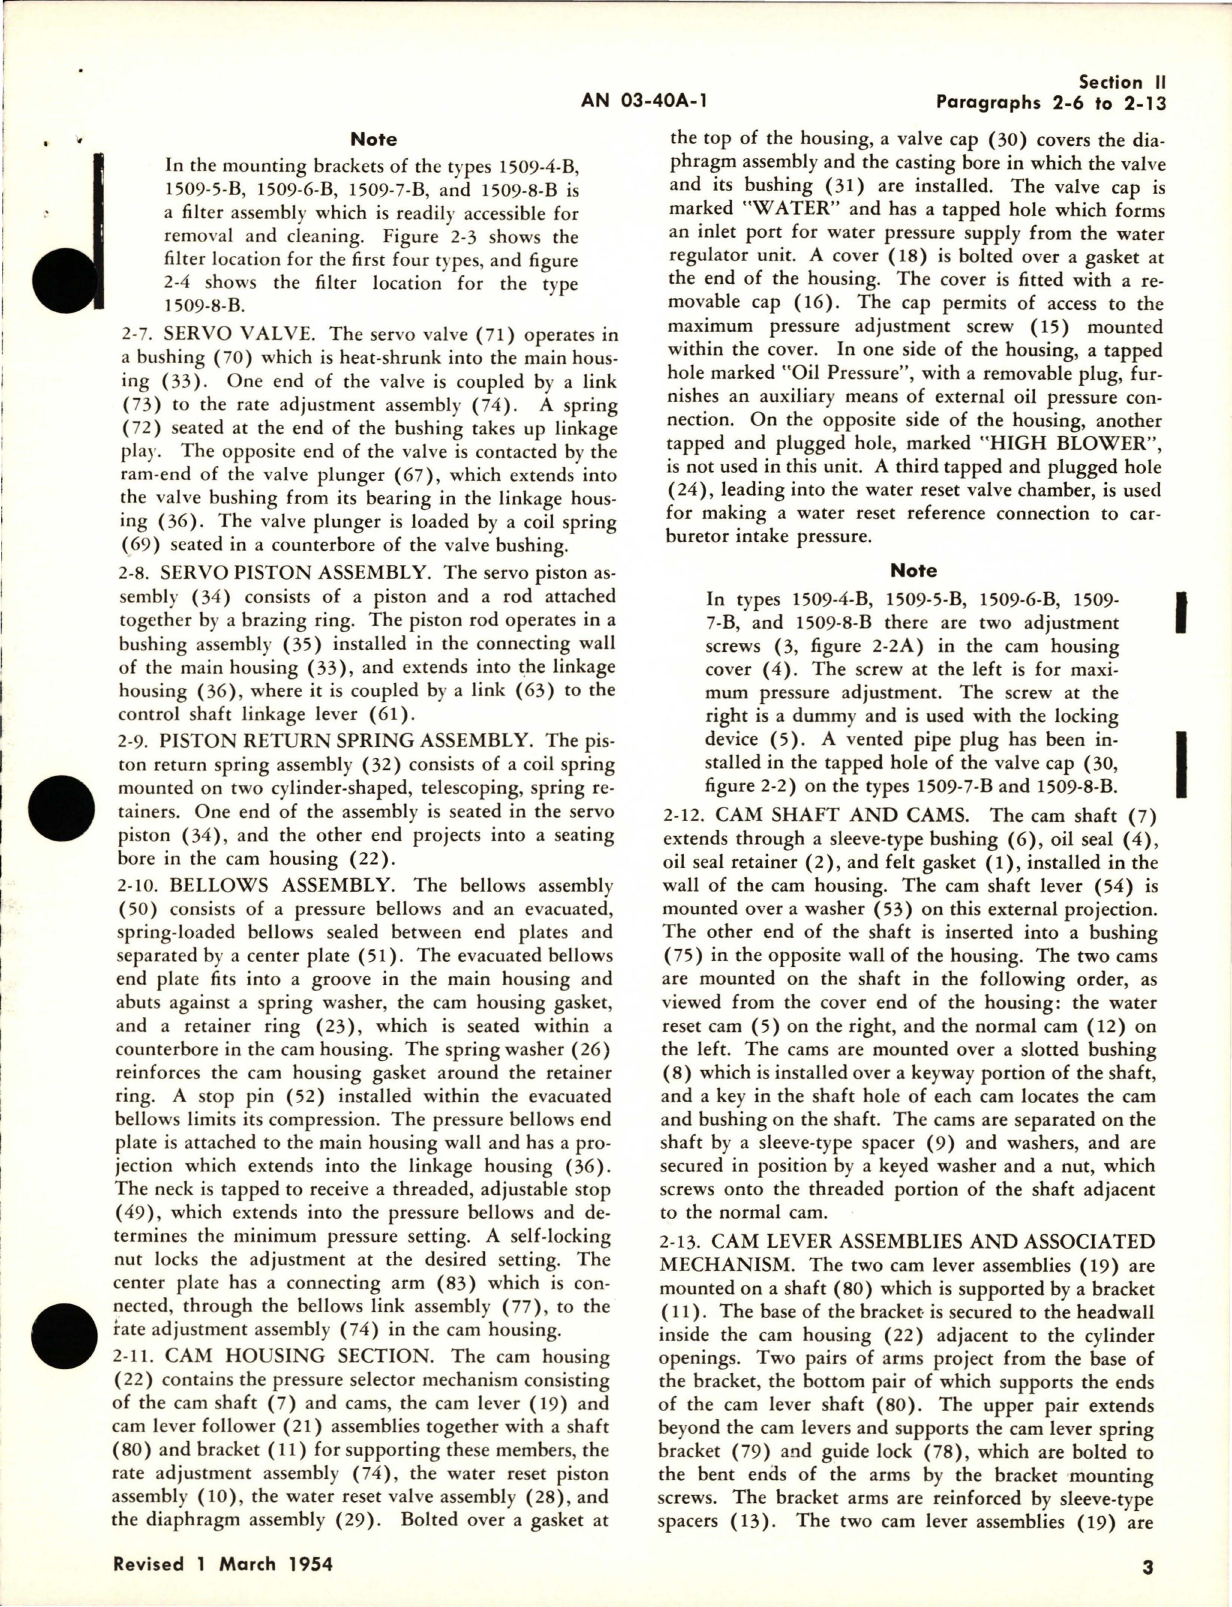 Sample page 7 from AirCorps Library document: Operation and Service Instructions for Automatic Boost Control